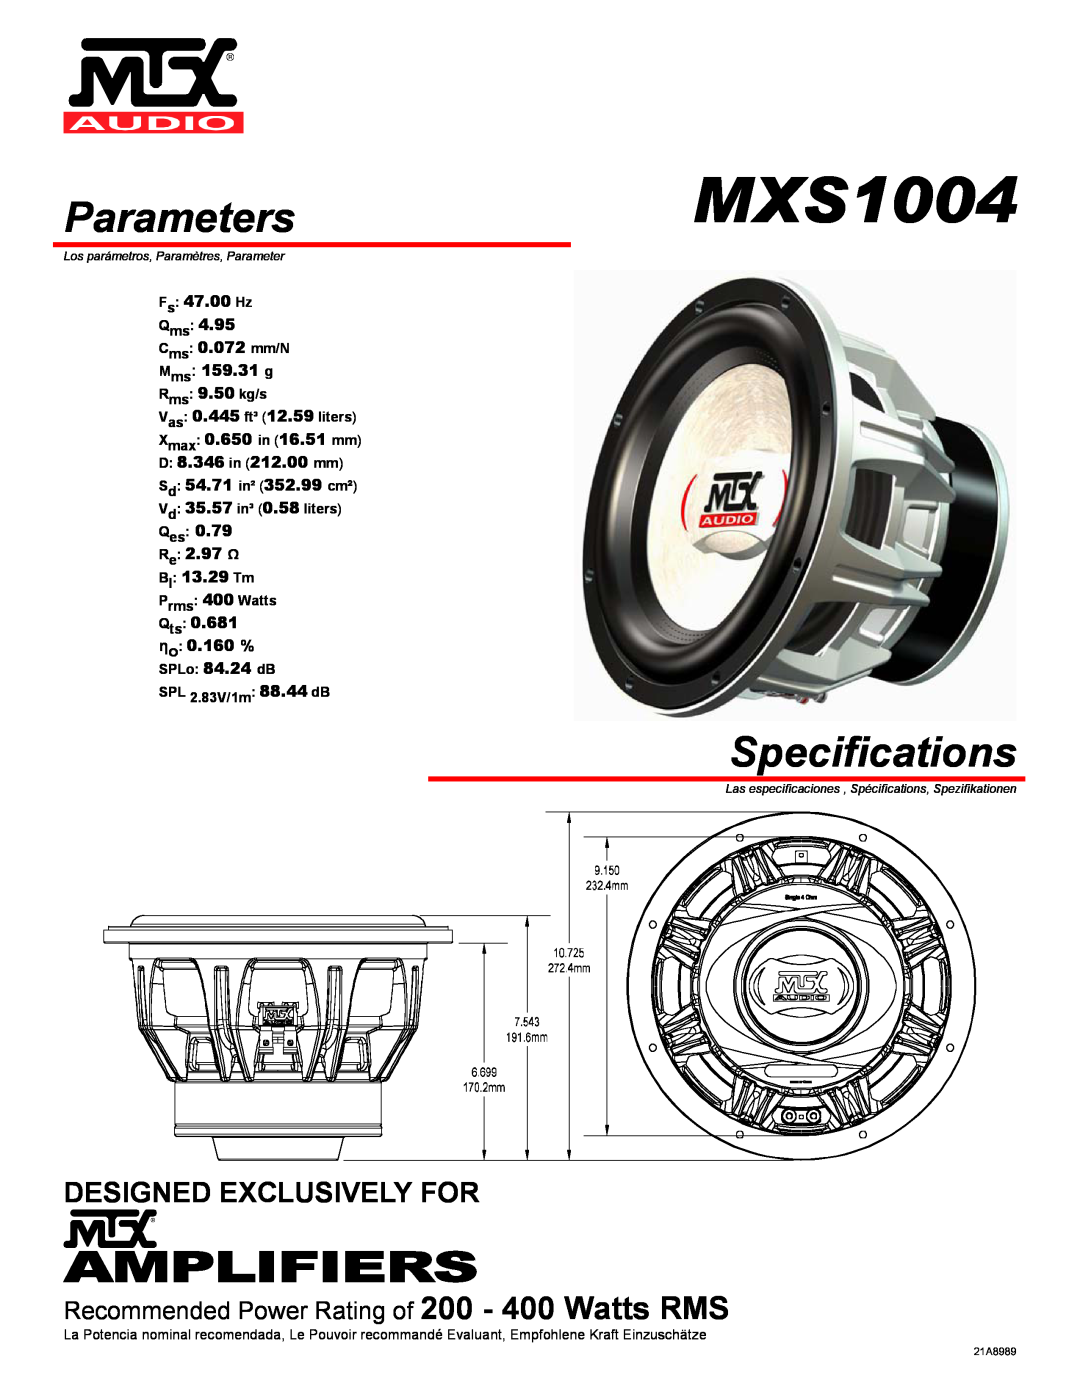 MTX Audio MXS1004 specifications Parameters, Specifications, Amplifiers, Designed Exclusively For, Fs 47.00 Hz Qms 